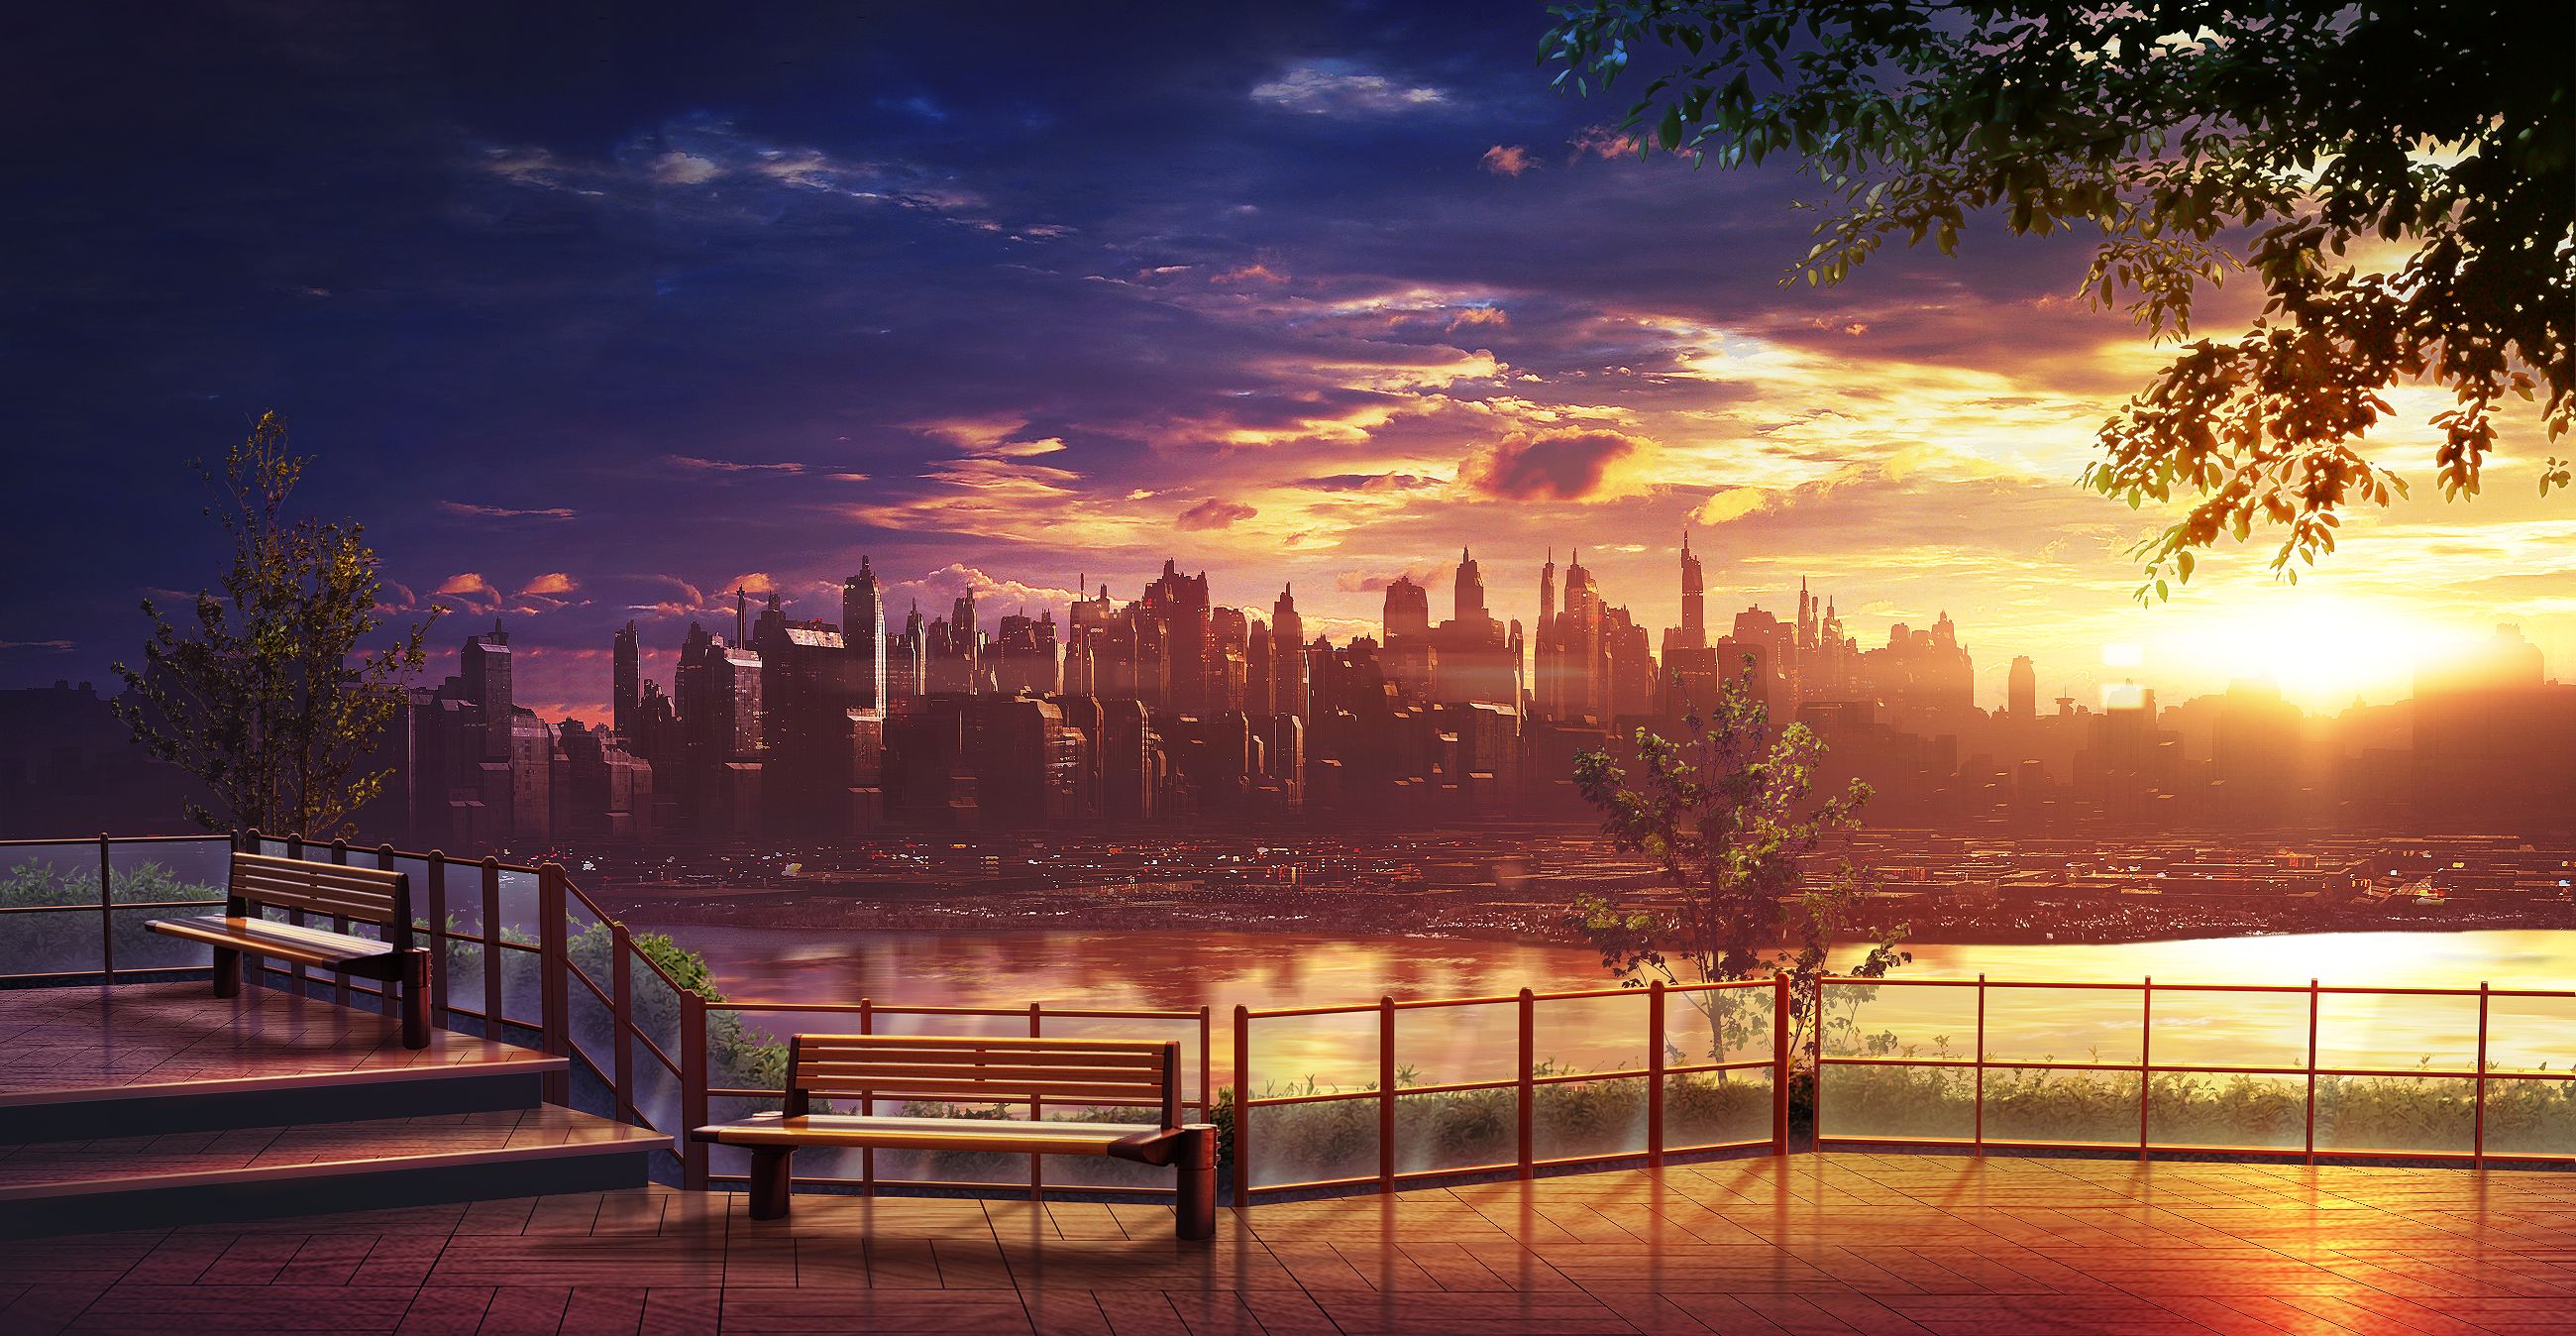 lake, stairs, sky, evening, anime, city, bench, cloud, parc, sunset 1080p